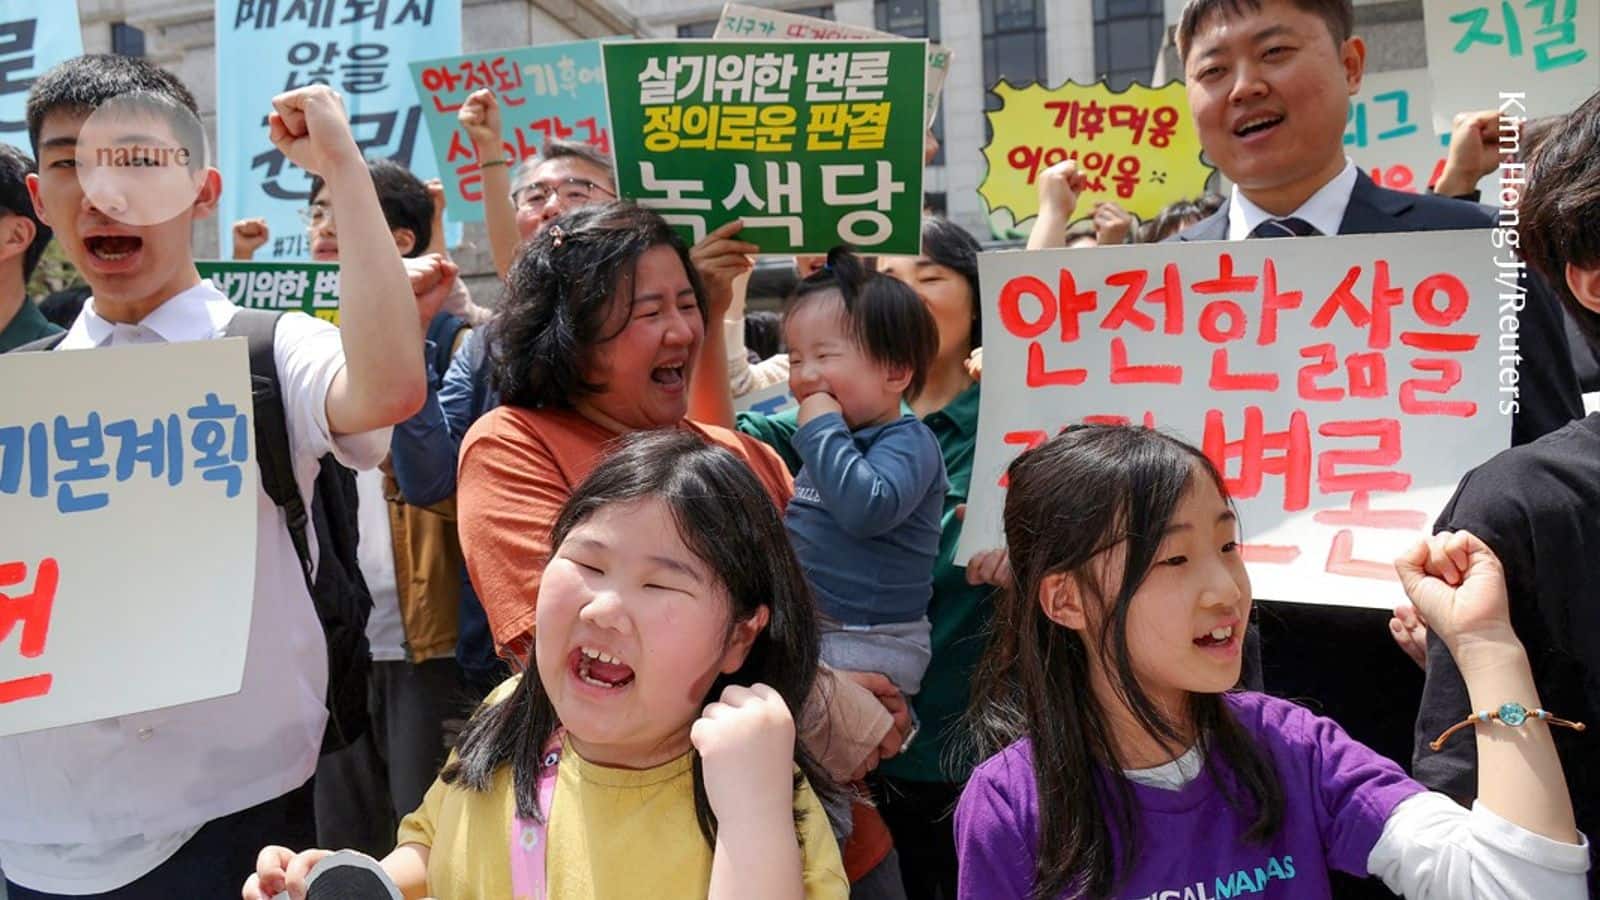 Why children, babies in South Korea are suing the government